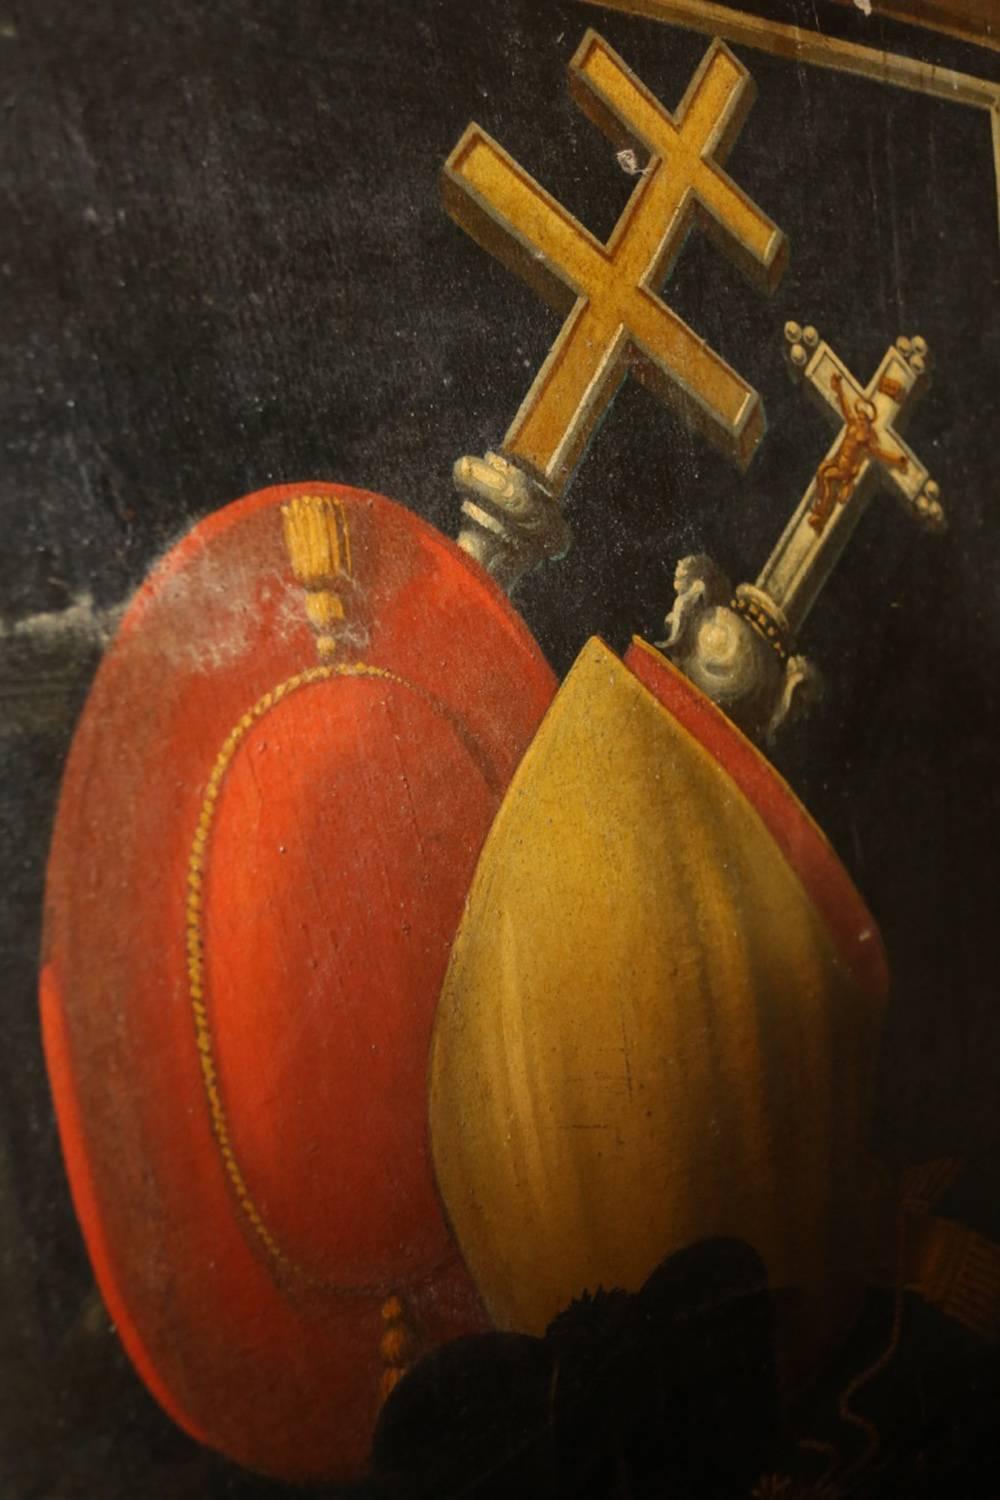 Pair of huge 18th century Italian oil on canvas church panels exceptional quality

These are simply the best artwork I have ever bought. Pair of 18th century oil on canvas panels. They are fabulously detailed, full of history, in great condition,